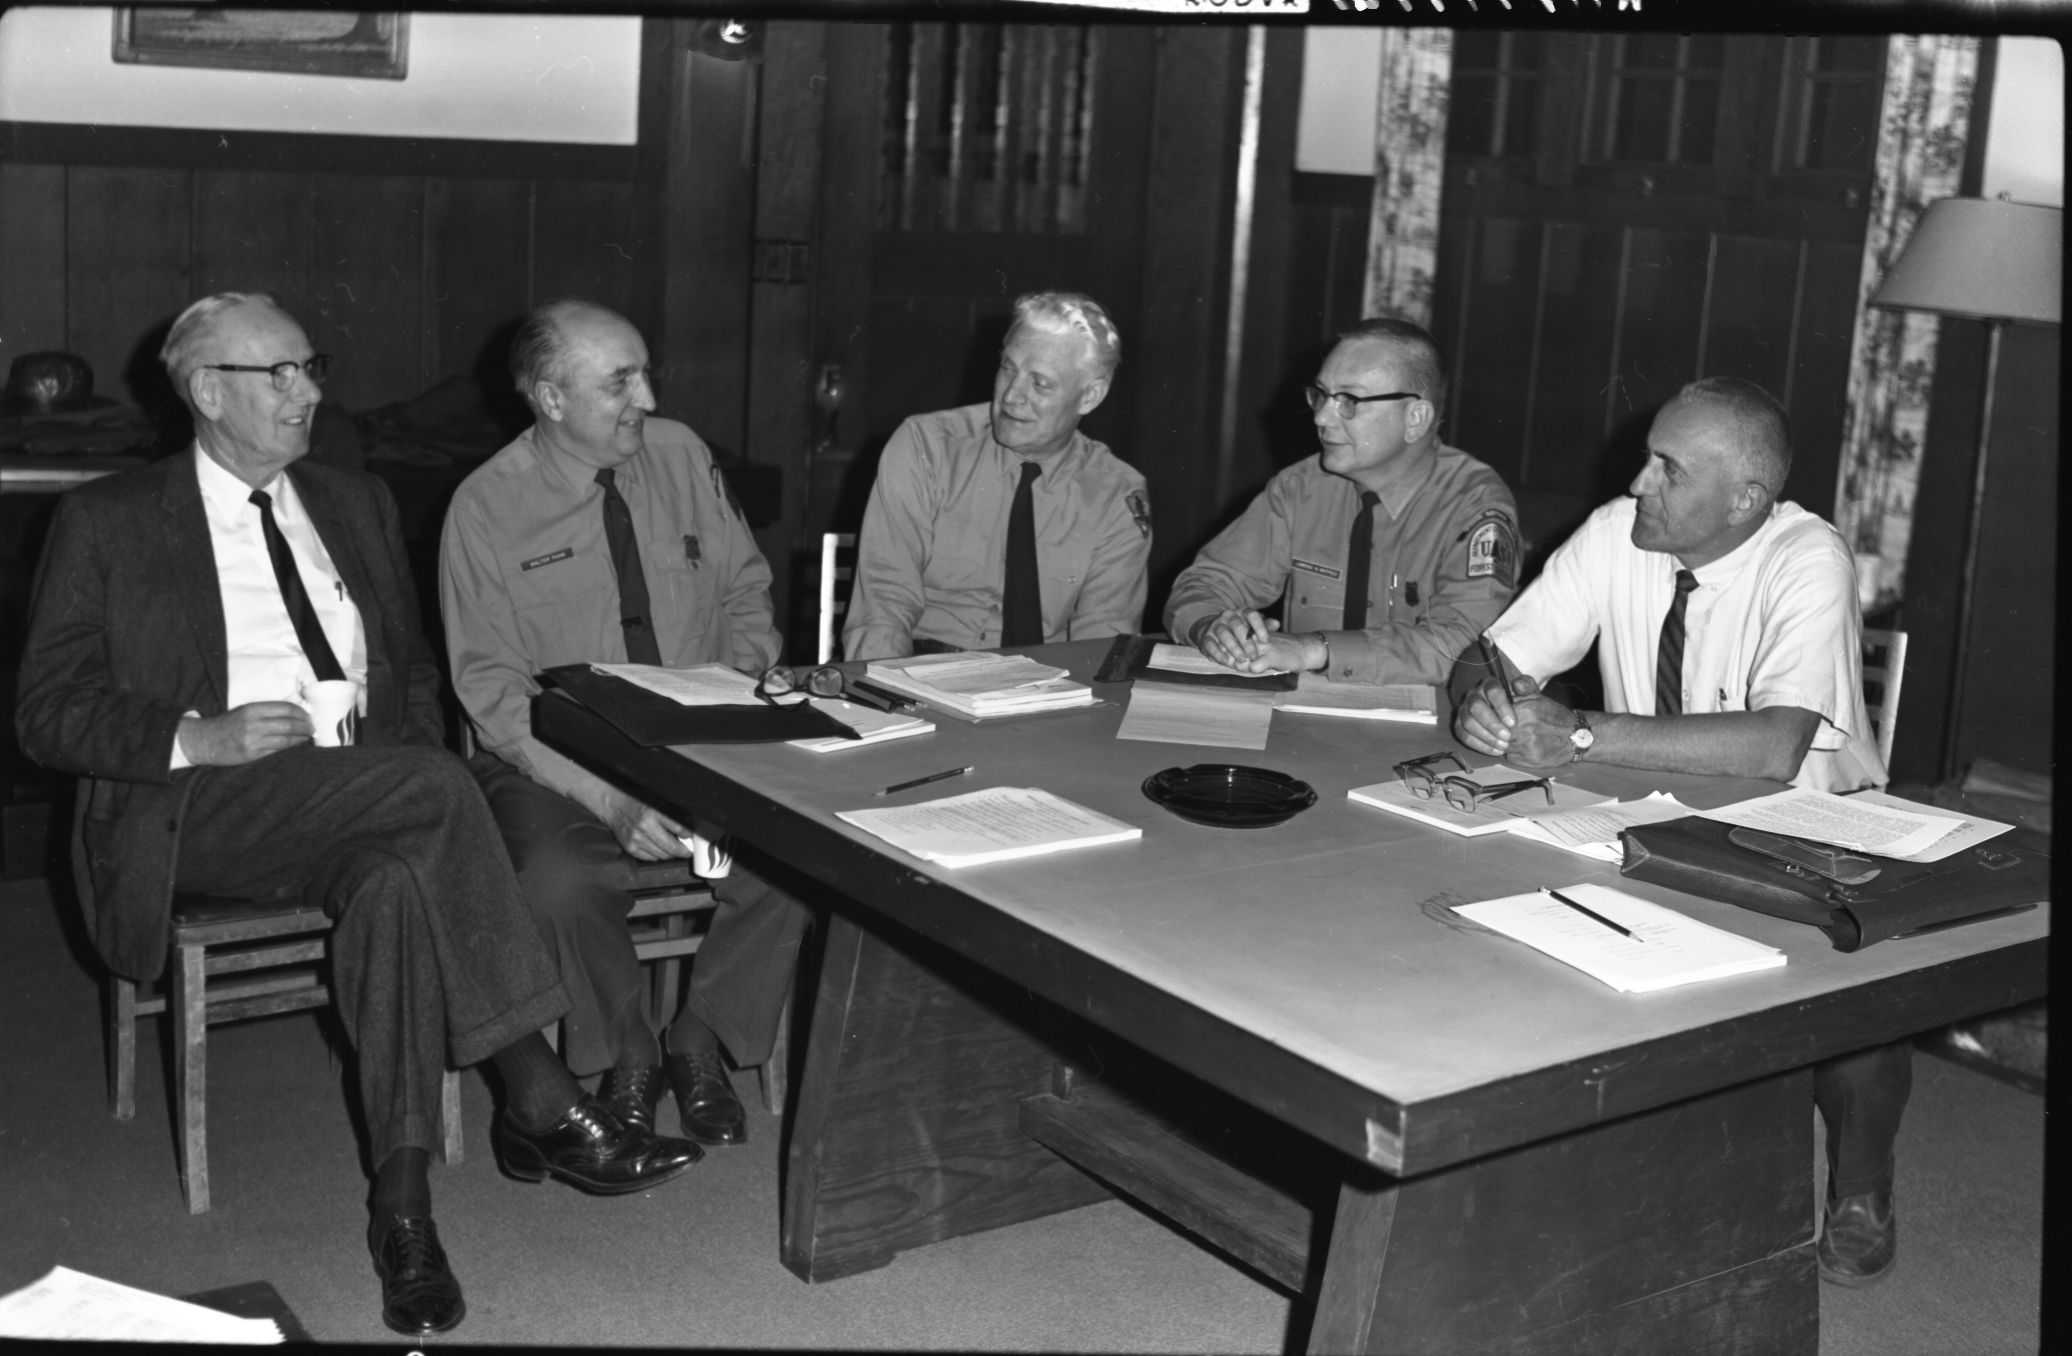 USFS - NPS Interagency meeting at Yosemite's Rangers Club: Area Managers Discuss Common Problems on National Forests & National Parks. L to R: John M Davis, Supt. Sequoia-Kings Canyon NP; Walter J. Puhn, Spvsr. Sierra NF; John C. Preston, Supt. Yosemite NP; Lawrence M. Whitfield, Spvsr. Sequoia NF; Joseph T. Radel, Spvsr. Inyo NF. Harry Grace, Spvsr. Stanislaus NF was absent.